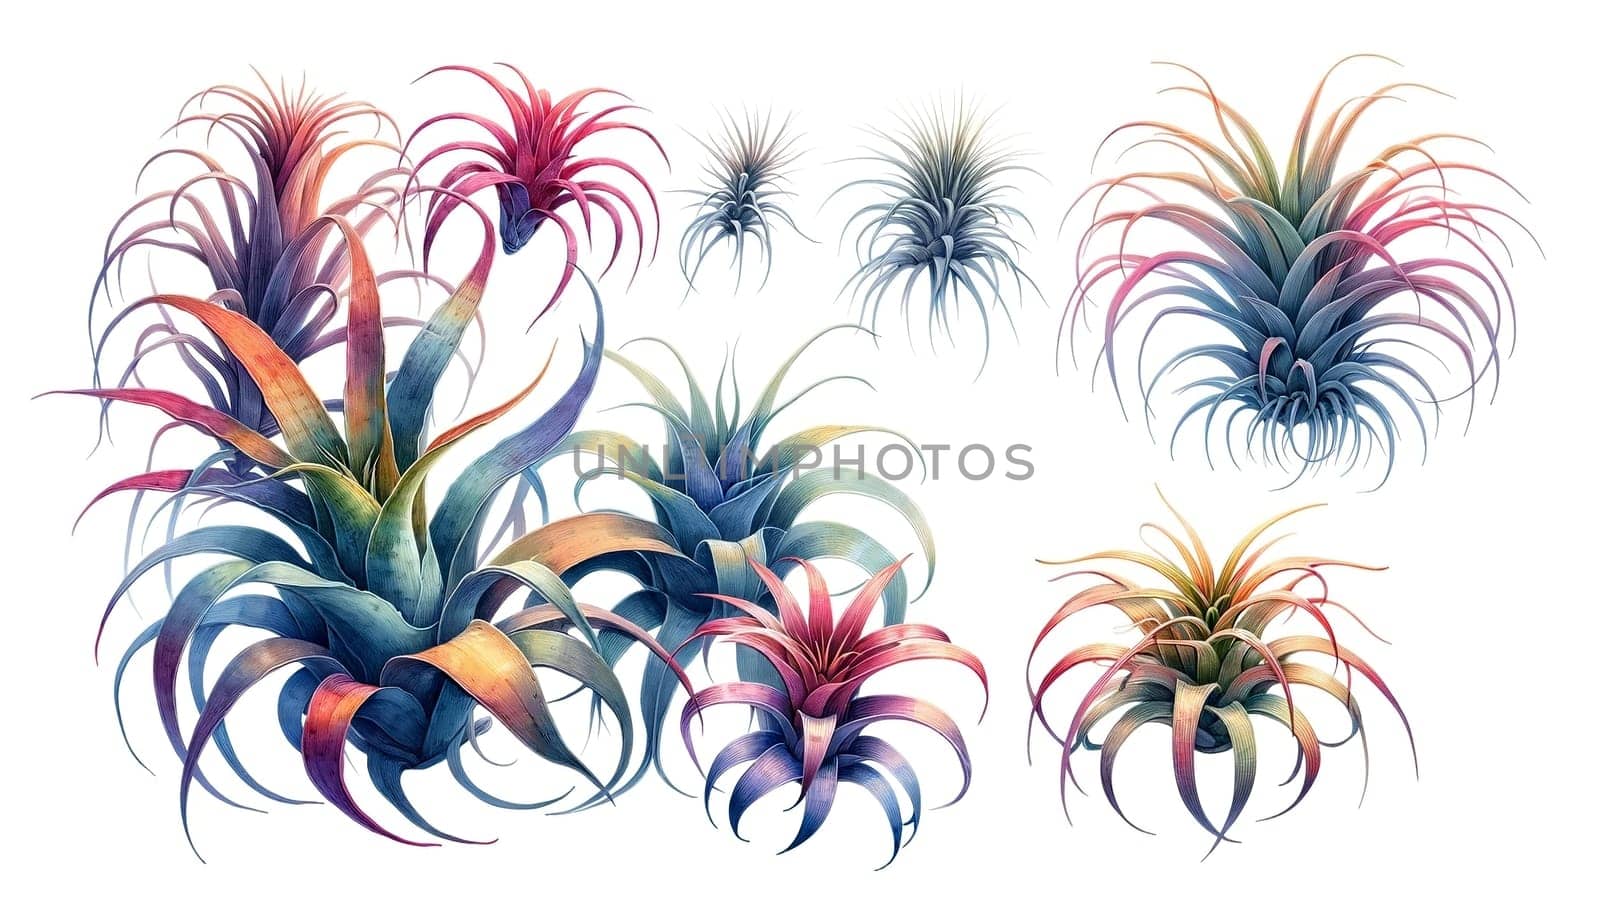 Isolated illustrations of Air Plants against White Background. High quality illustration